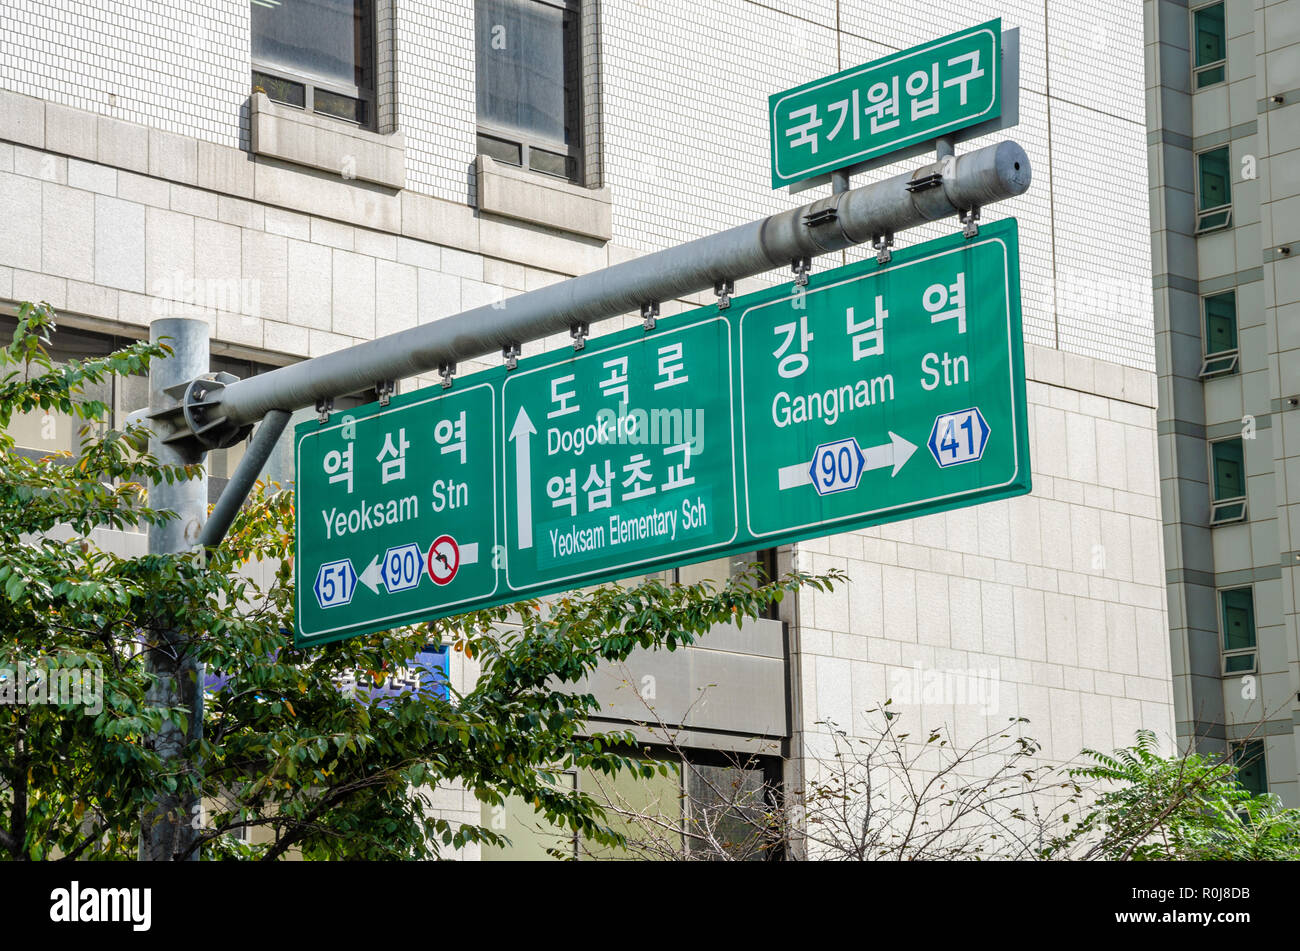 Road signs overhanging the road in Gangnam, Seoul, South Korea give directions to help drivers navigate. Stock Photo